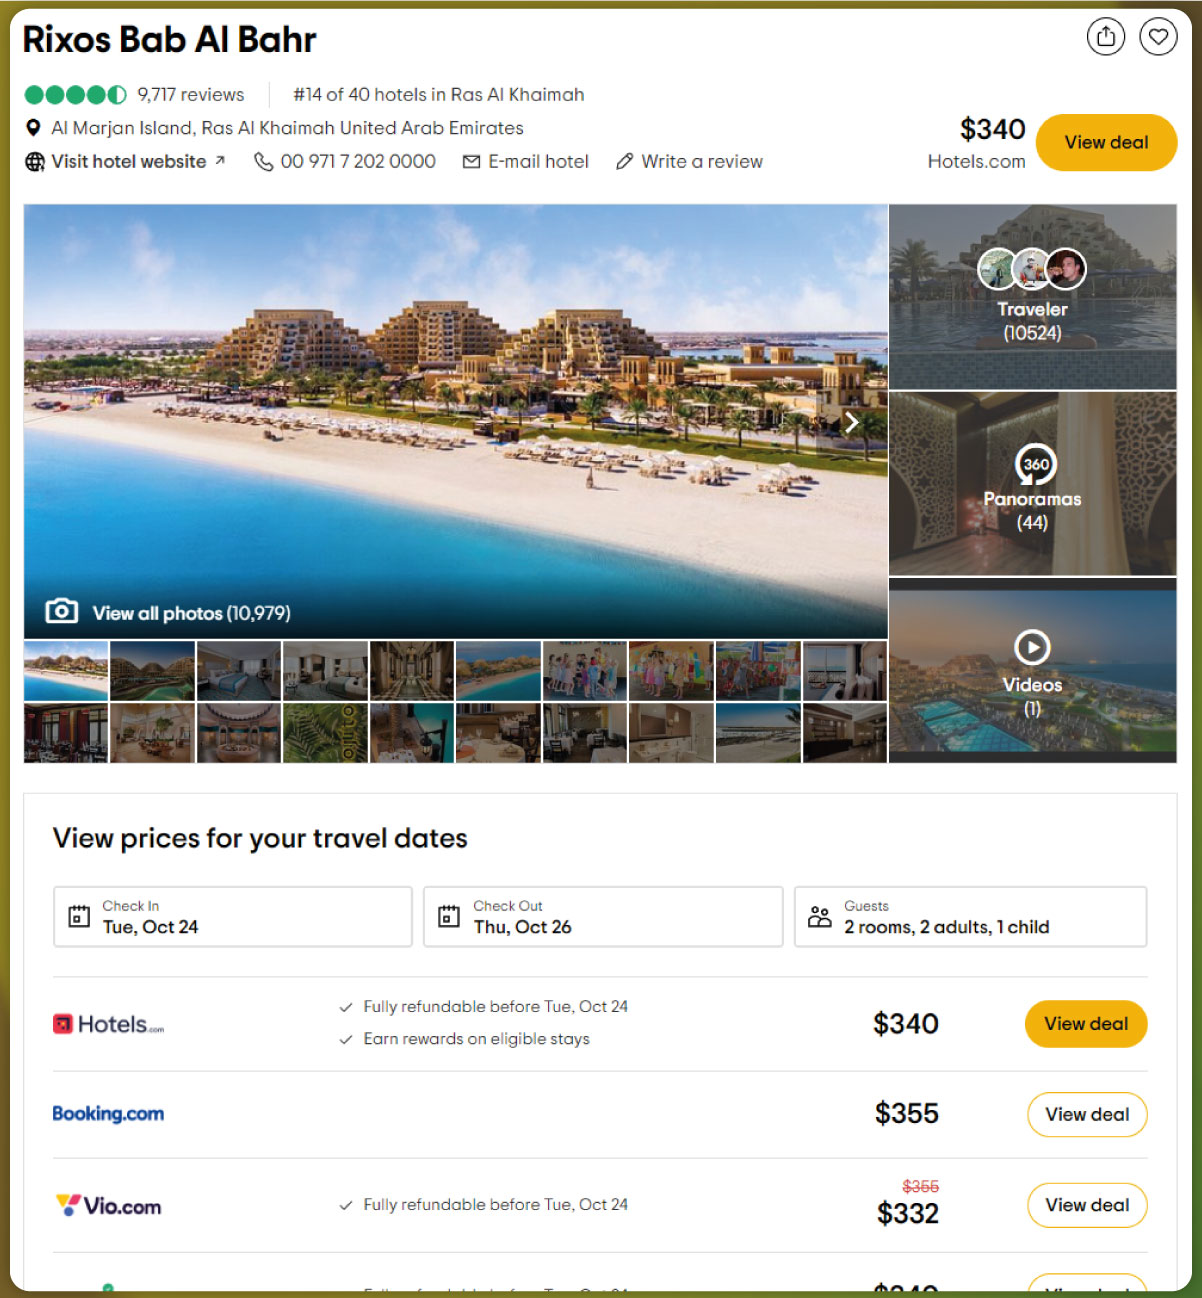 List-of-Data-Fields-You-Should-Consider-to-Scrape-Hotel-Pricing-Data-from-TripAdvisor